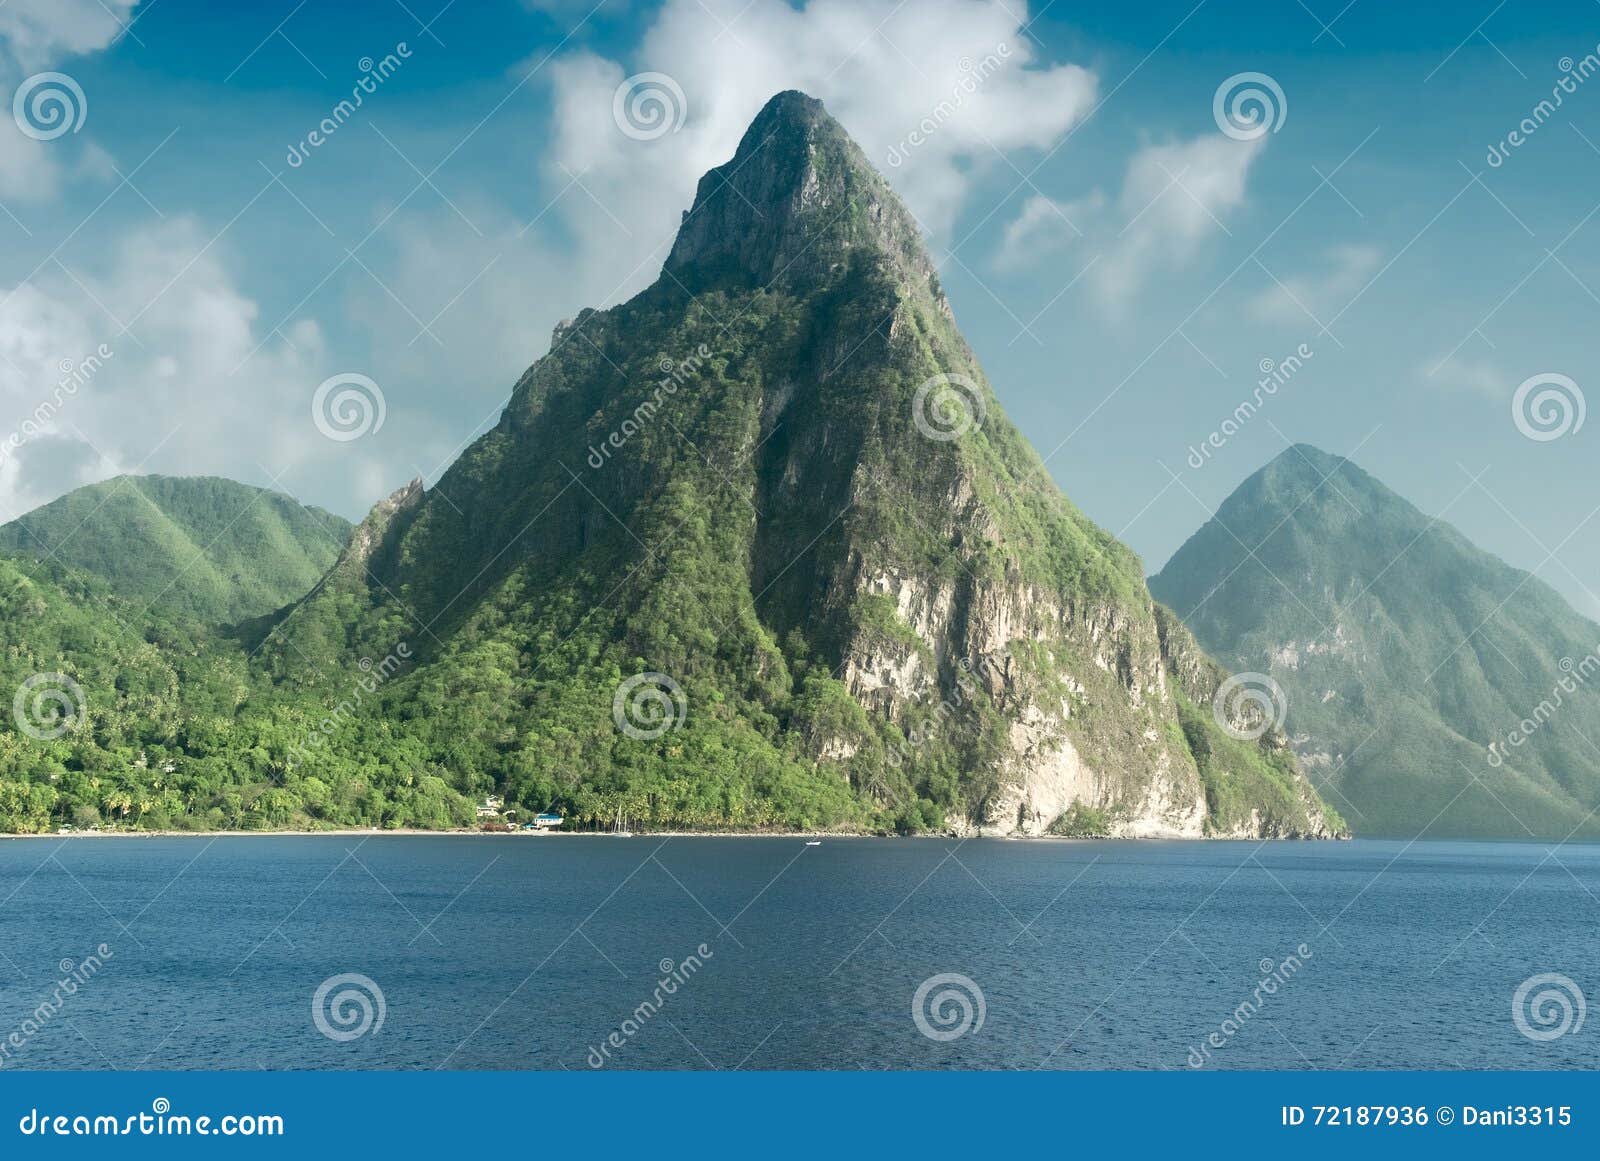 view of the famous piton mountains in st lucia